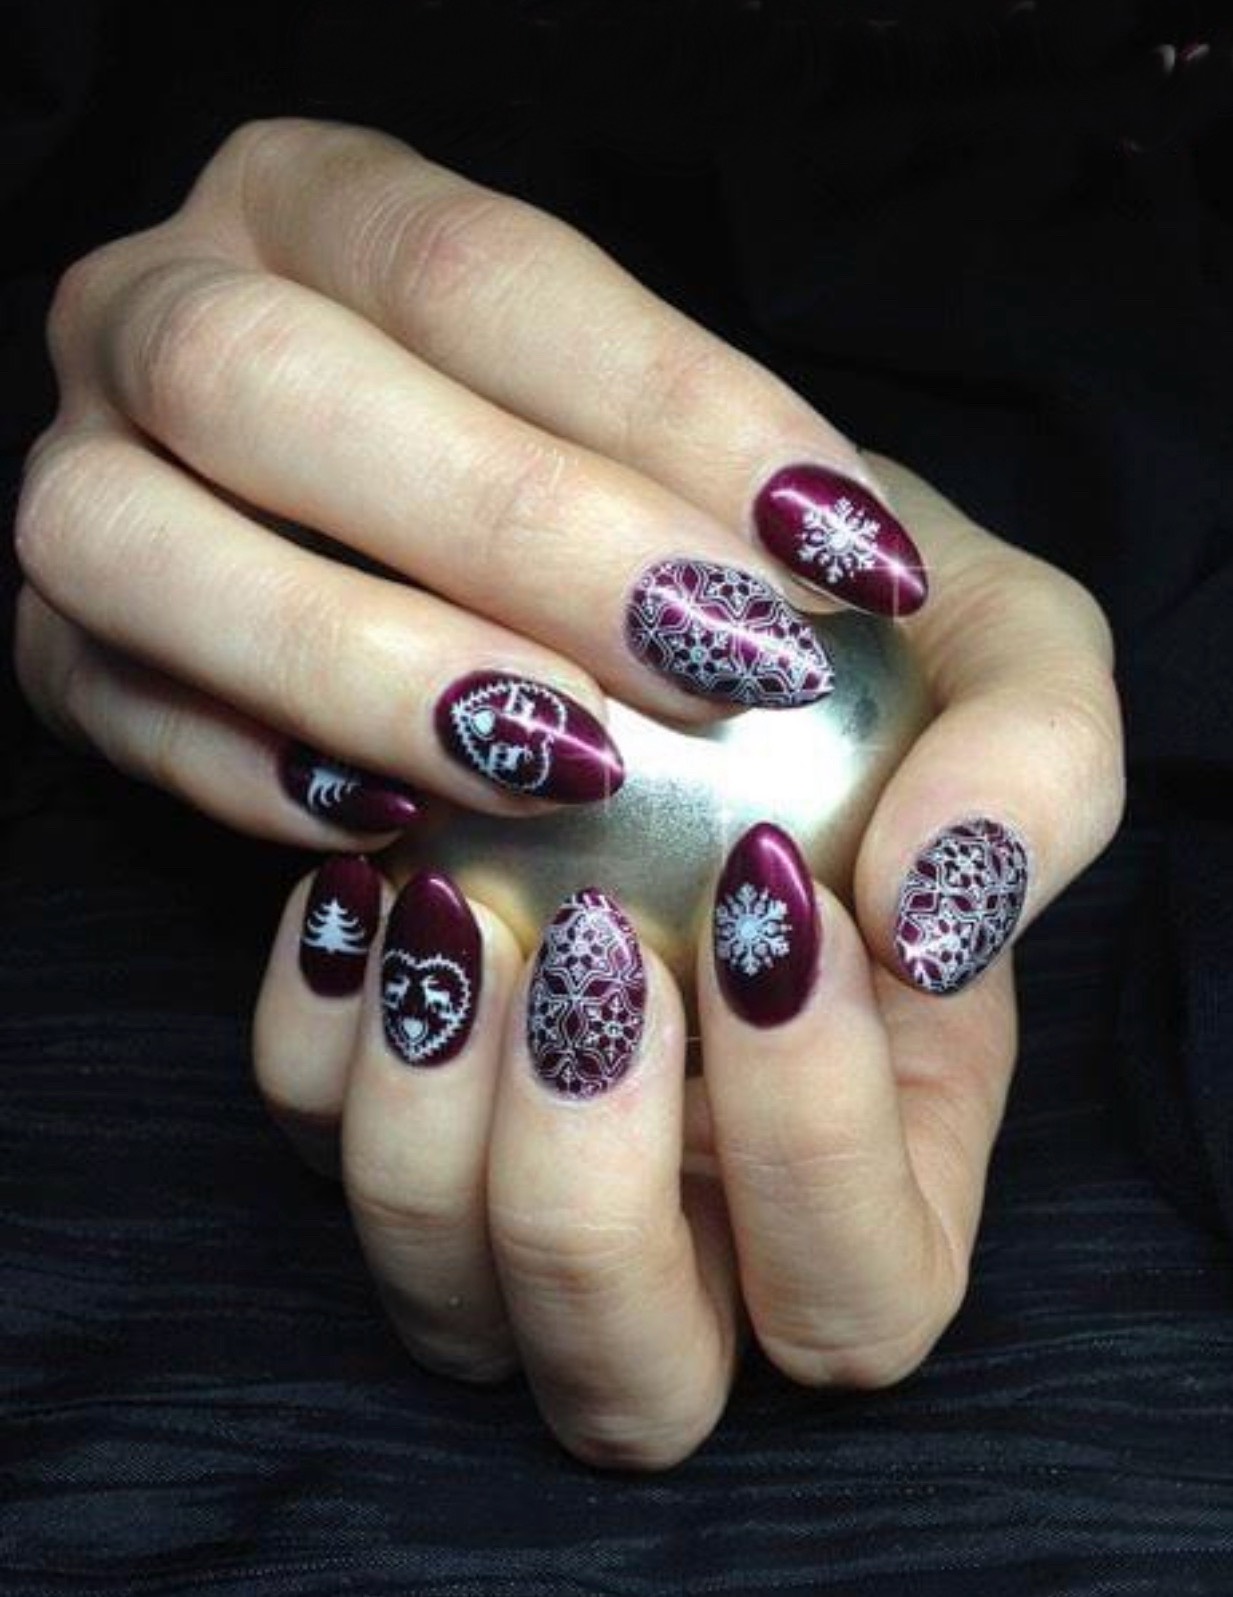 Classic Maroon and white stamping